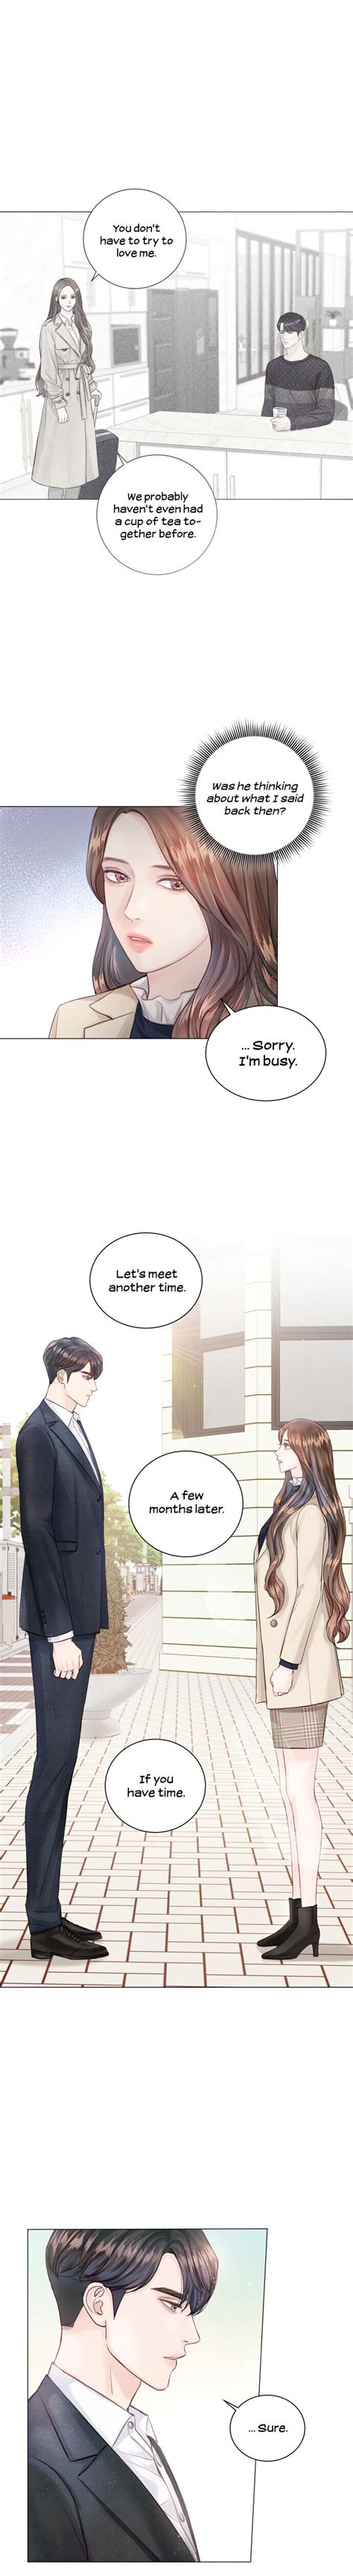 There must be Happy Endings manhwa. Surely a Happy Ending. Манхва после школы